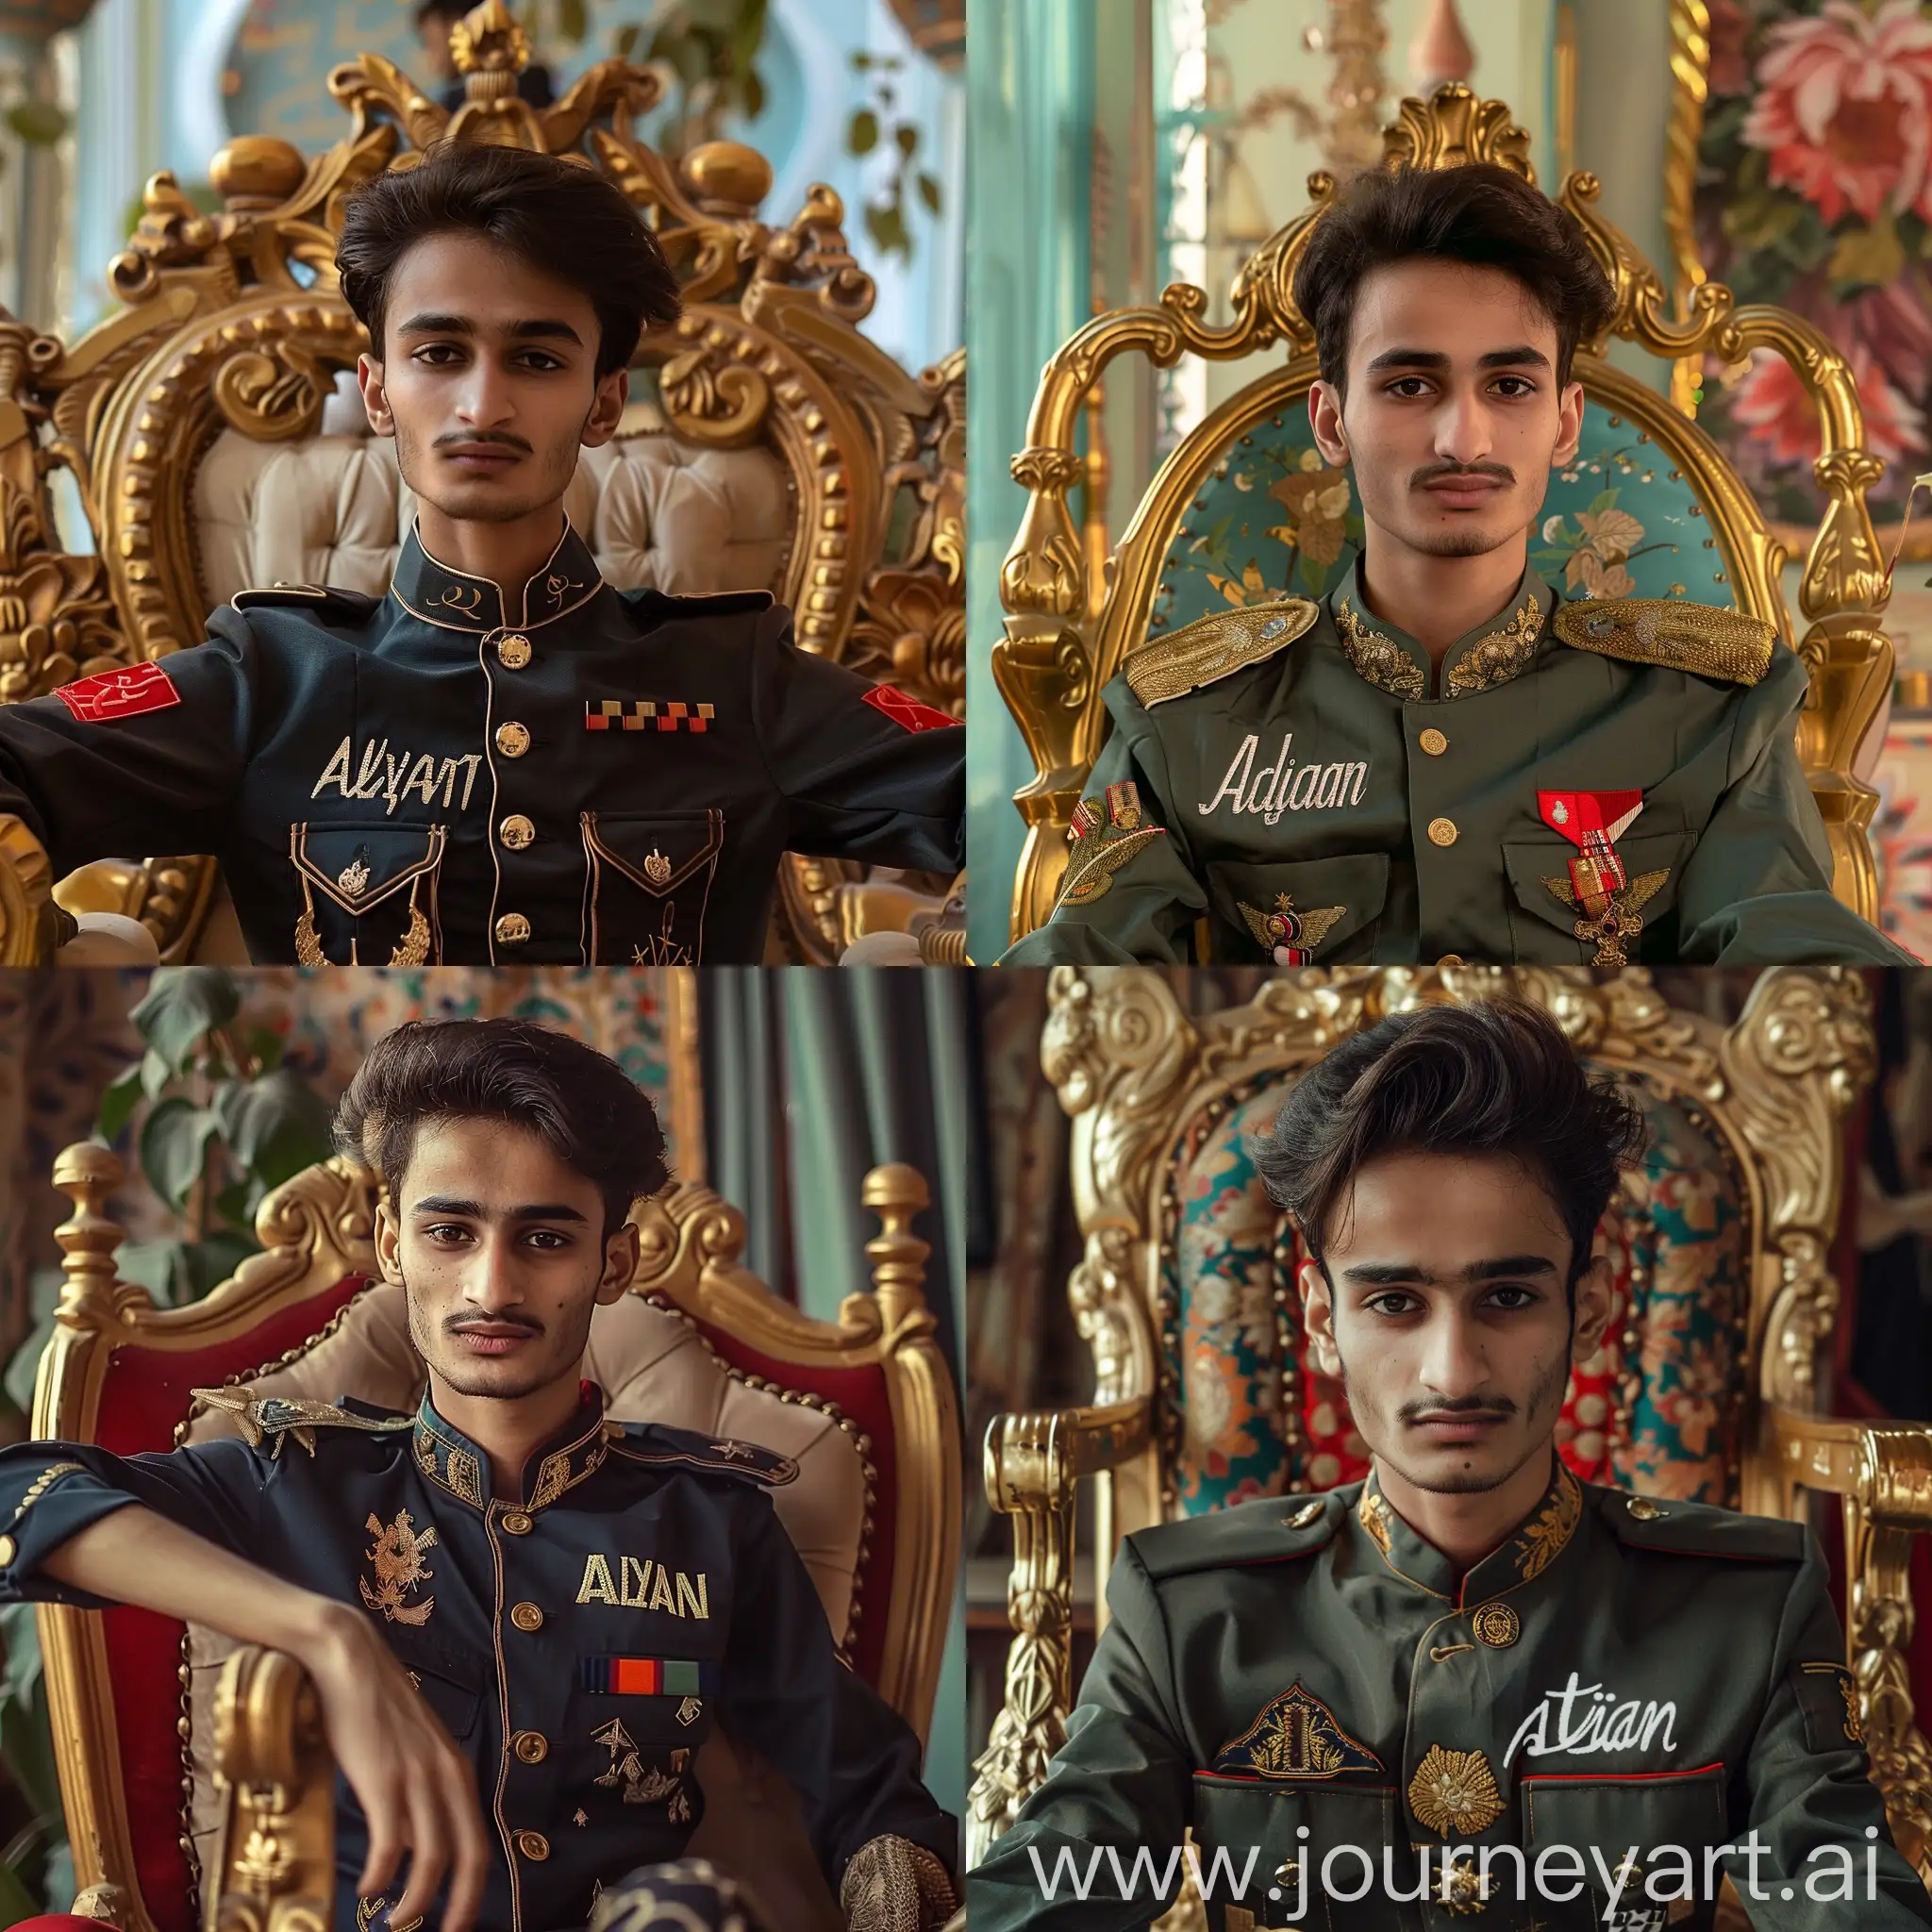 a teenager with slim physique, wearing an army uniform with "Alyan" embroidery on it. He is sitting on the gold made military chair with fantasy surroundings --style raw --cref https://cdn.discordapp.com/attachments/1215979386310889605/1216979067161804861/20240304052352195.jpg?ex=66025b13&is=65efe613&hm=e60fce9aad1857e1b24769950bafbf3bb7fc9e1f341e1c5e53fe09804bdf6b46& --cw 20